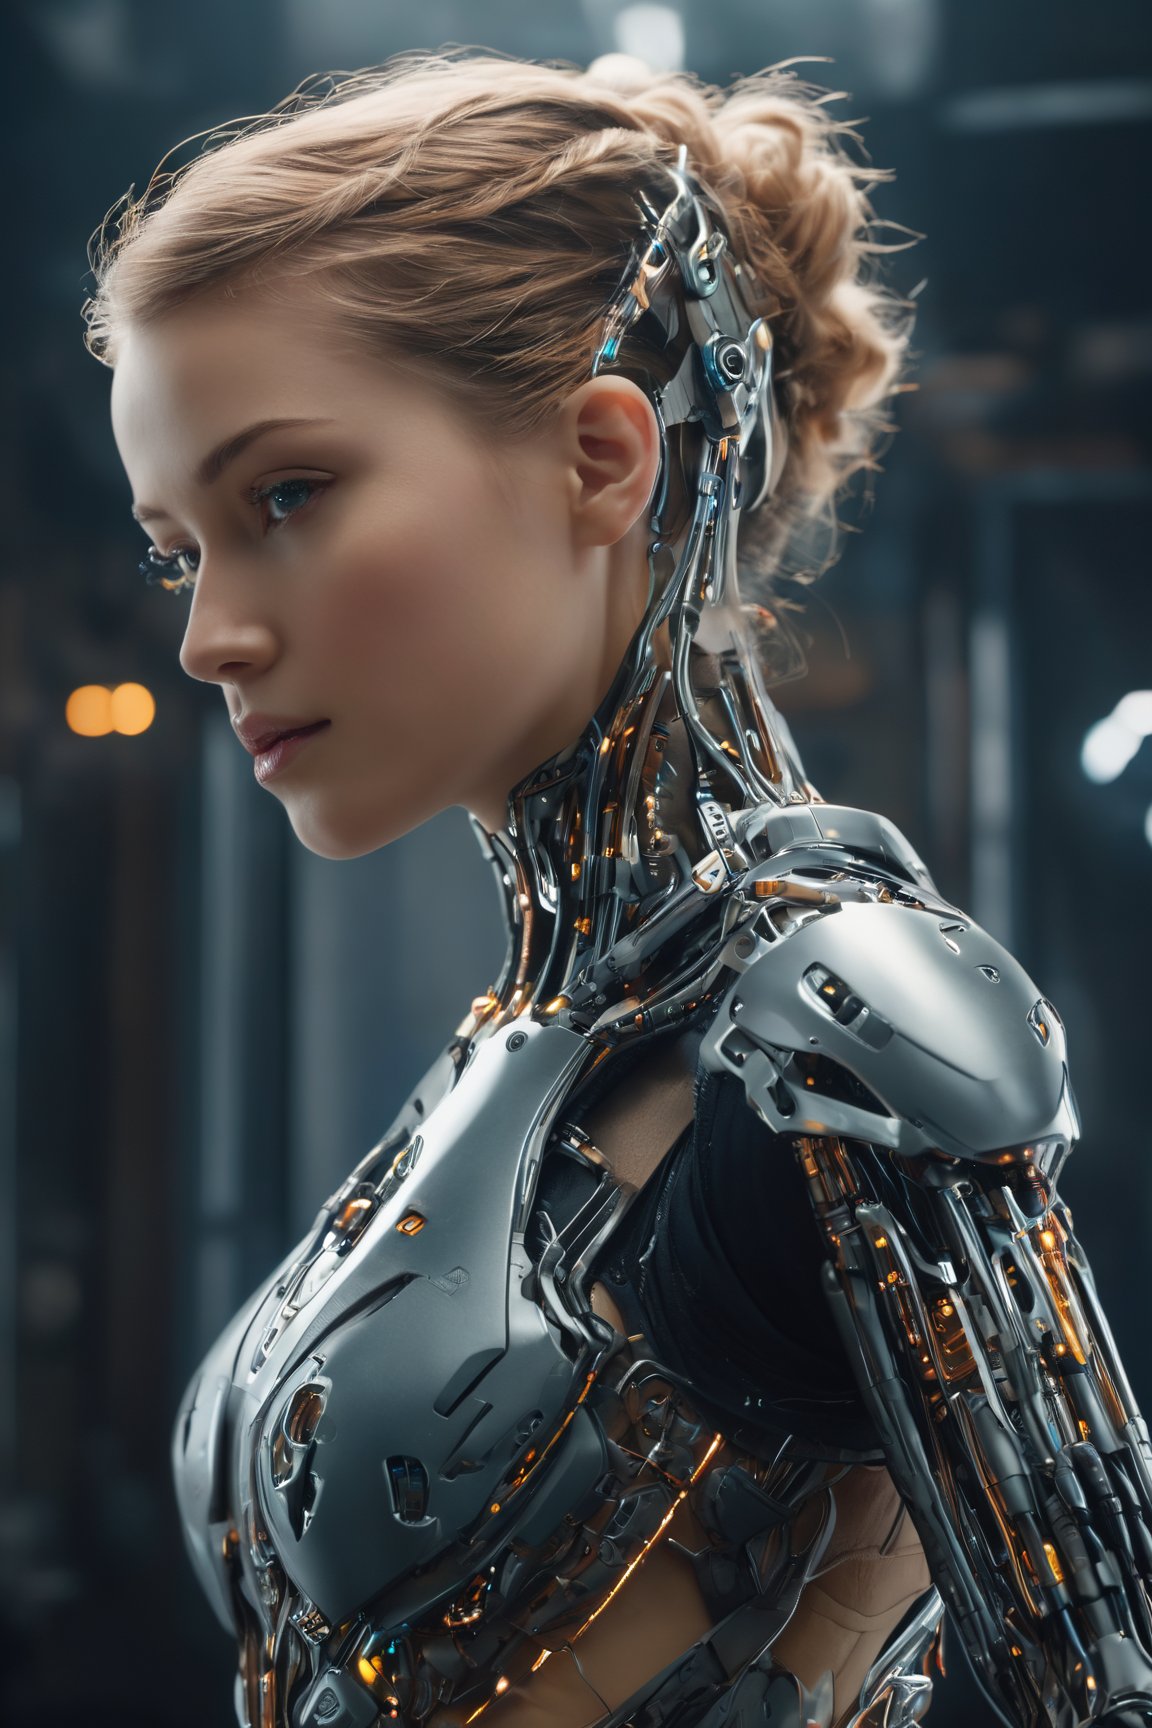 (best quality,  8K,  highres,  masterpiece),  hyper-detailed,  (photo-realistic,  lifelike) medium shot of a semi-cyborg female with biomechanical arms. The cinematic lighting accentuates the intricate details of her cybernetic limbs,  creating a visually stunning image that blurs the line between human and machine. This high-resolution masterpiece captures the essence of technological fusion and human beauty.